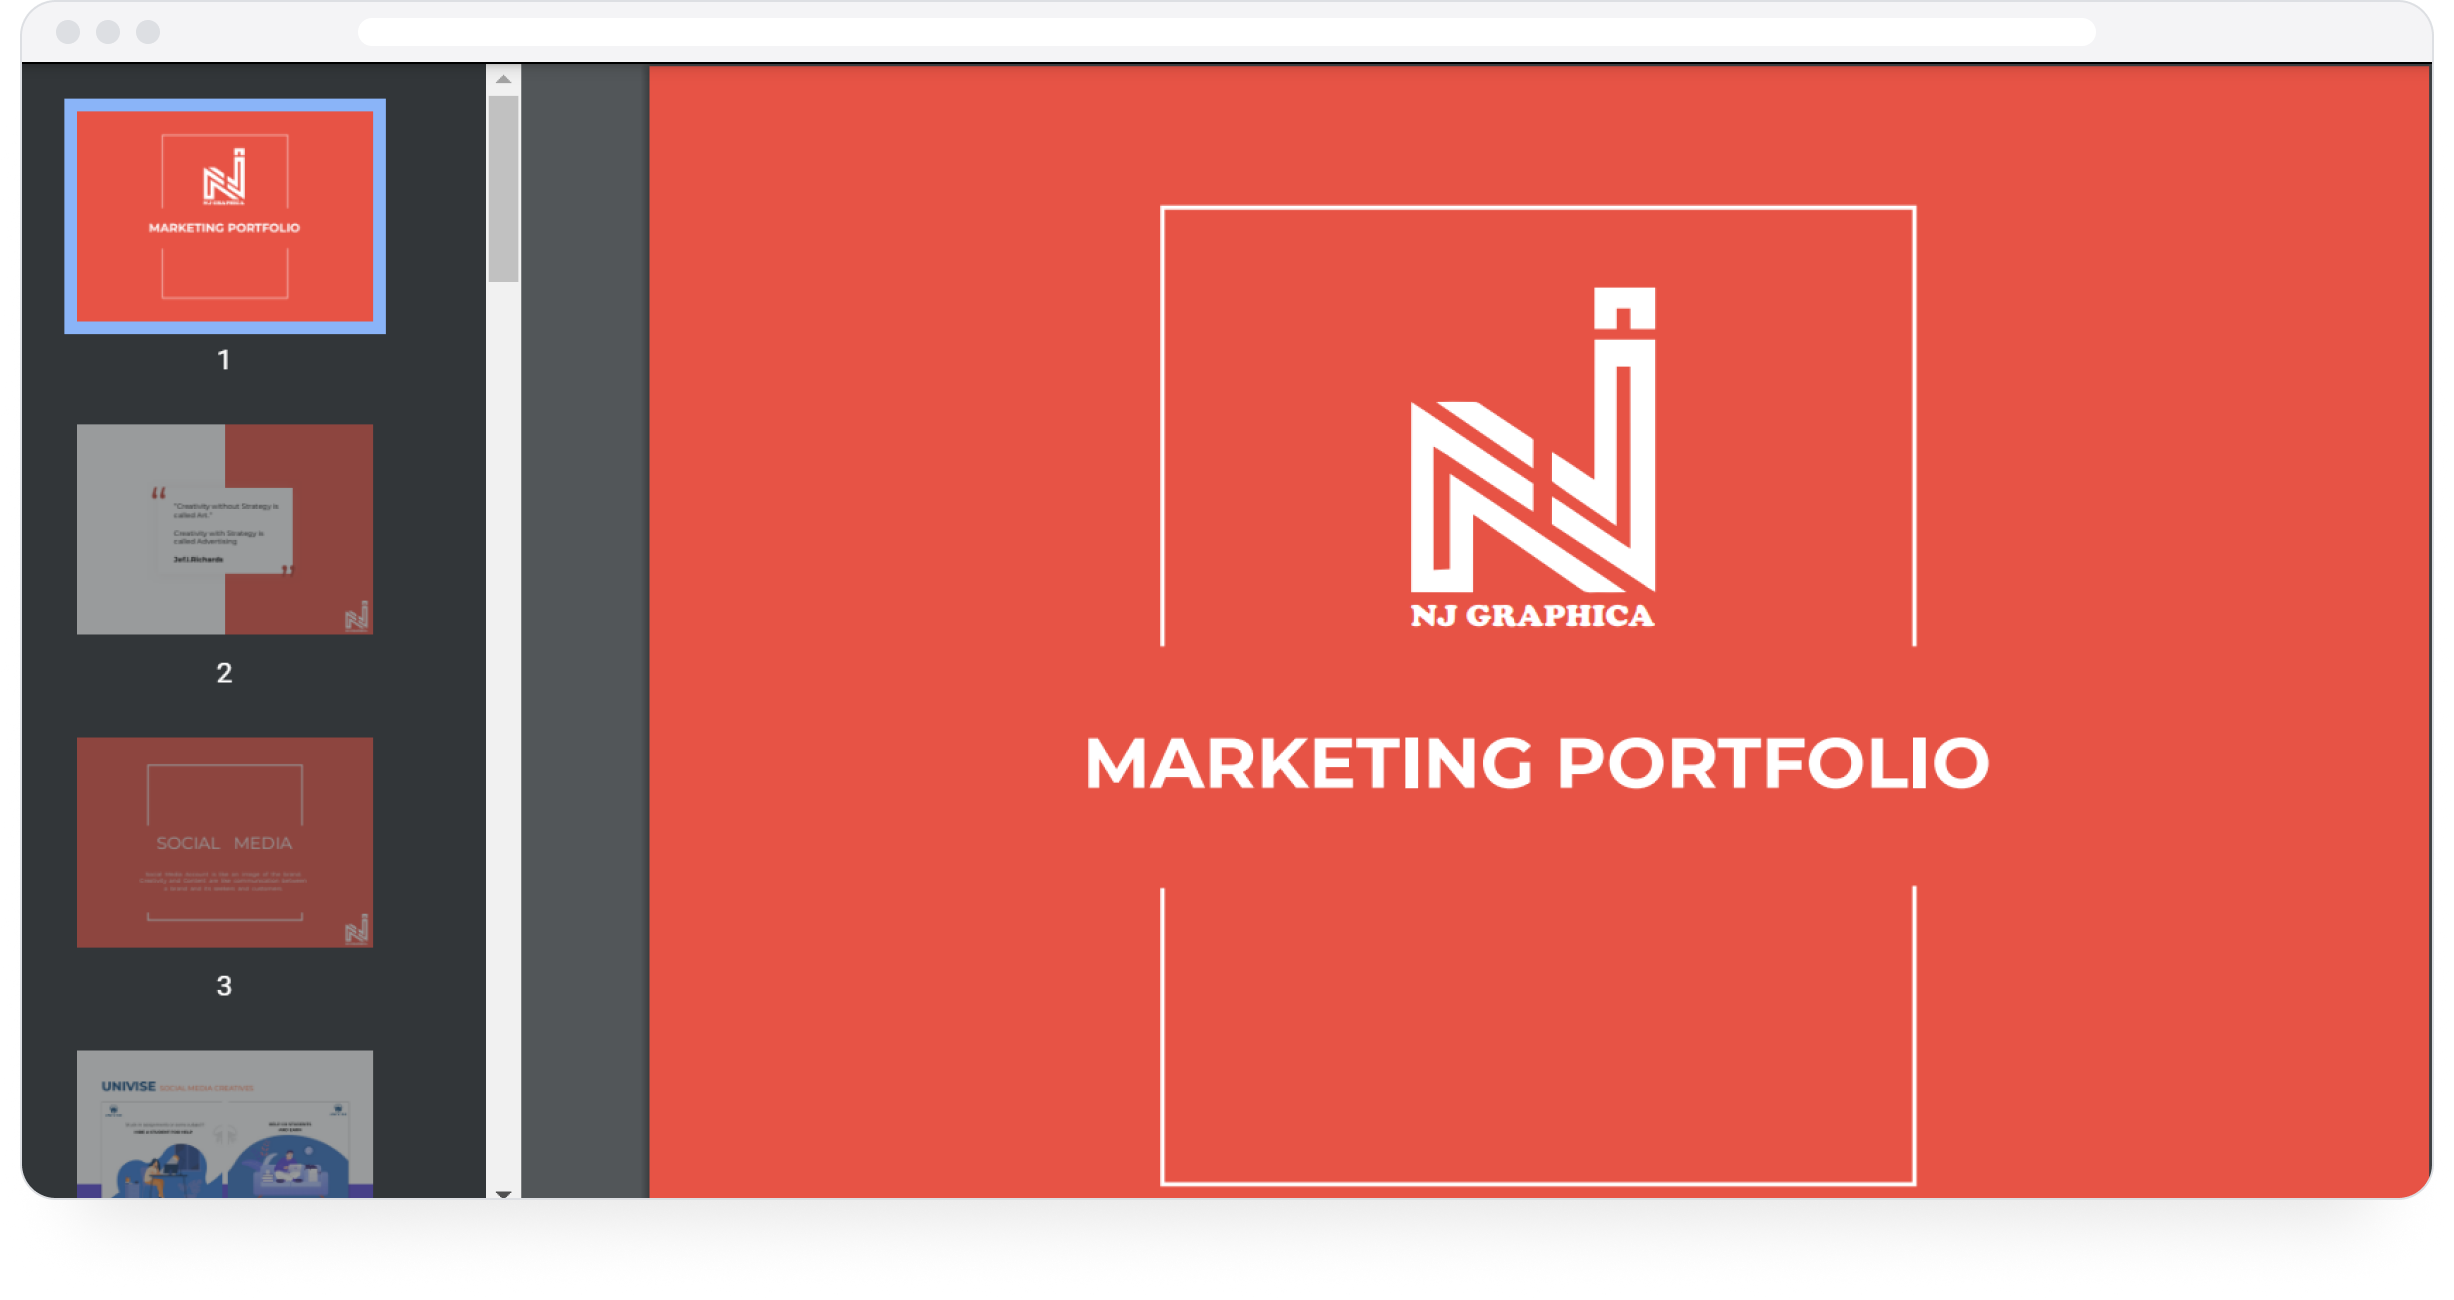 Marketing Portfolio Examples (PDF) You Should Really Look At